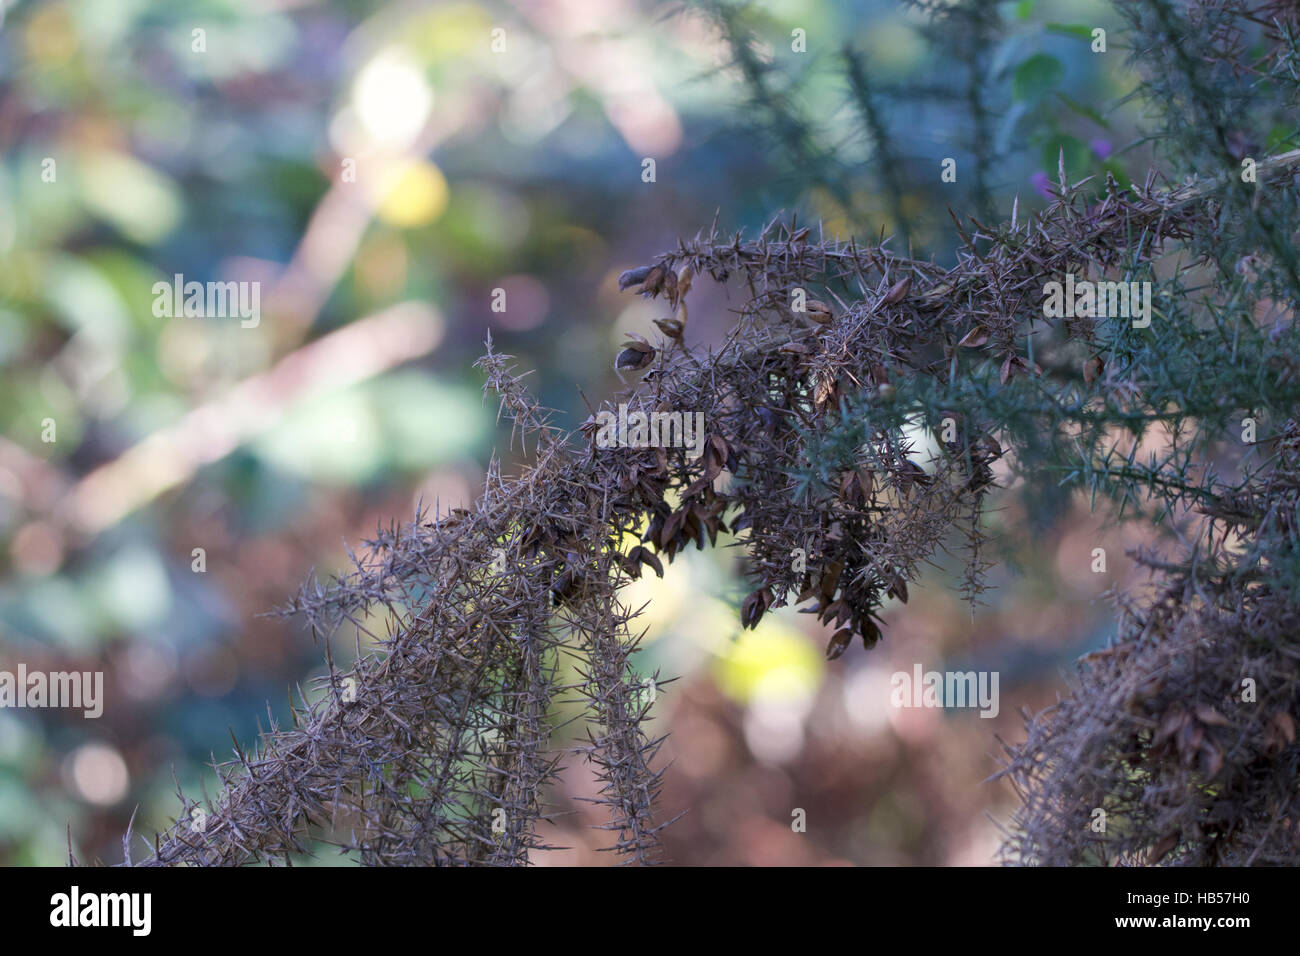 Well spiked thorn, with loads of prickles, dry standing out from live green blurred background Stock Photo